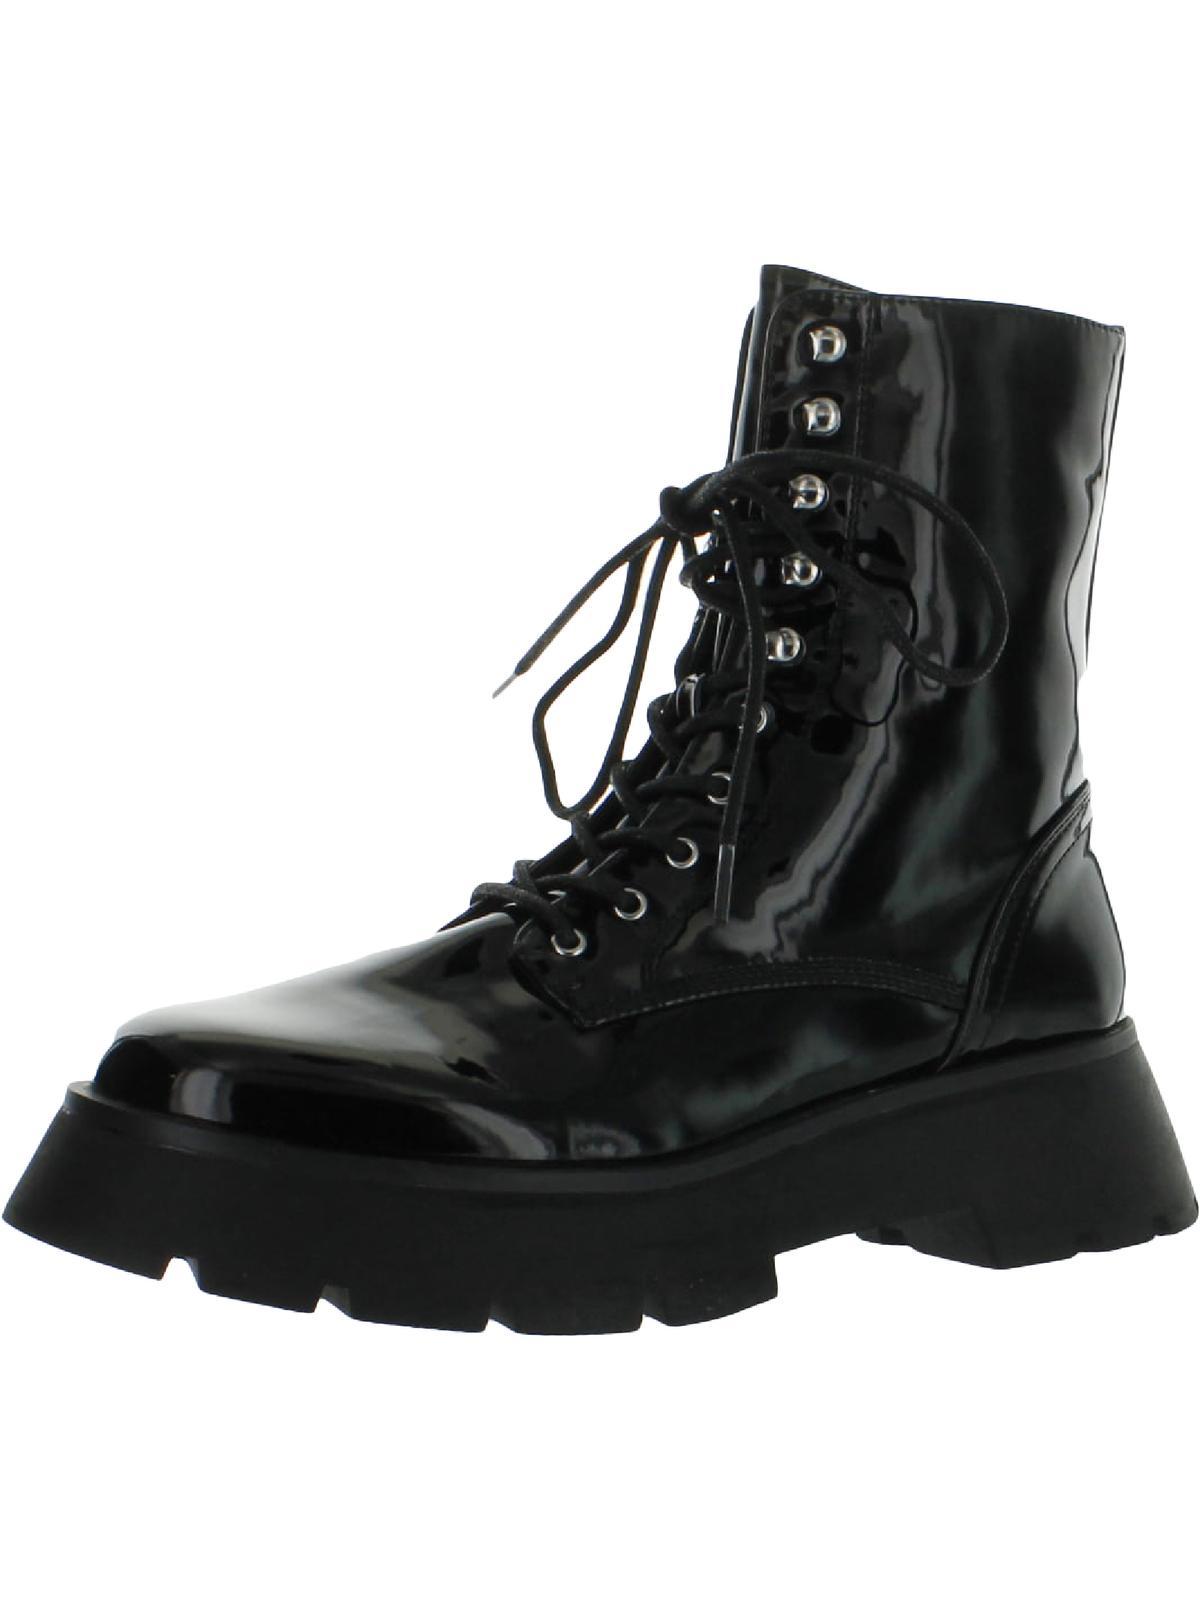 Circus by Sam Edelman Lolita Zipper Combat & Lace-up Boots in Black | Lyst